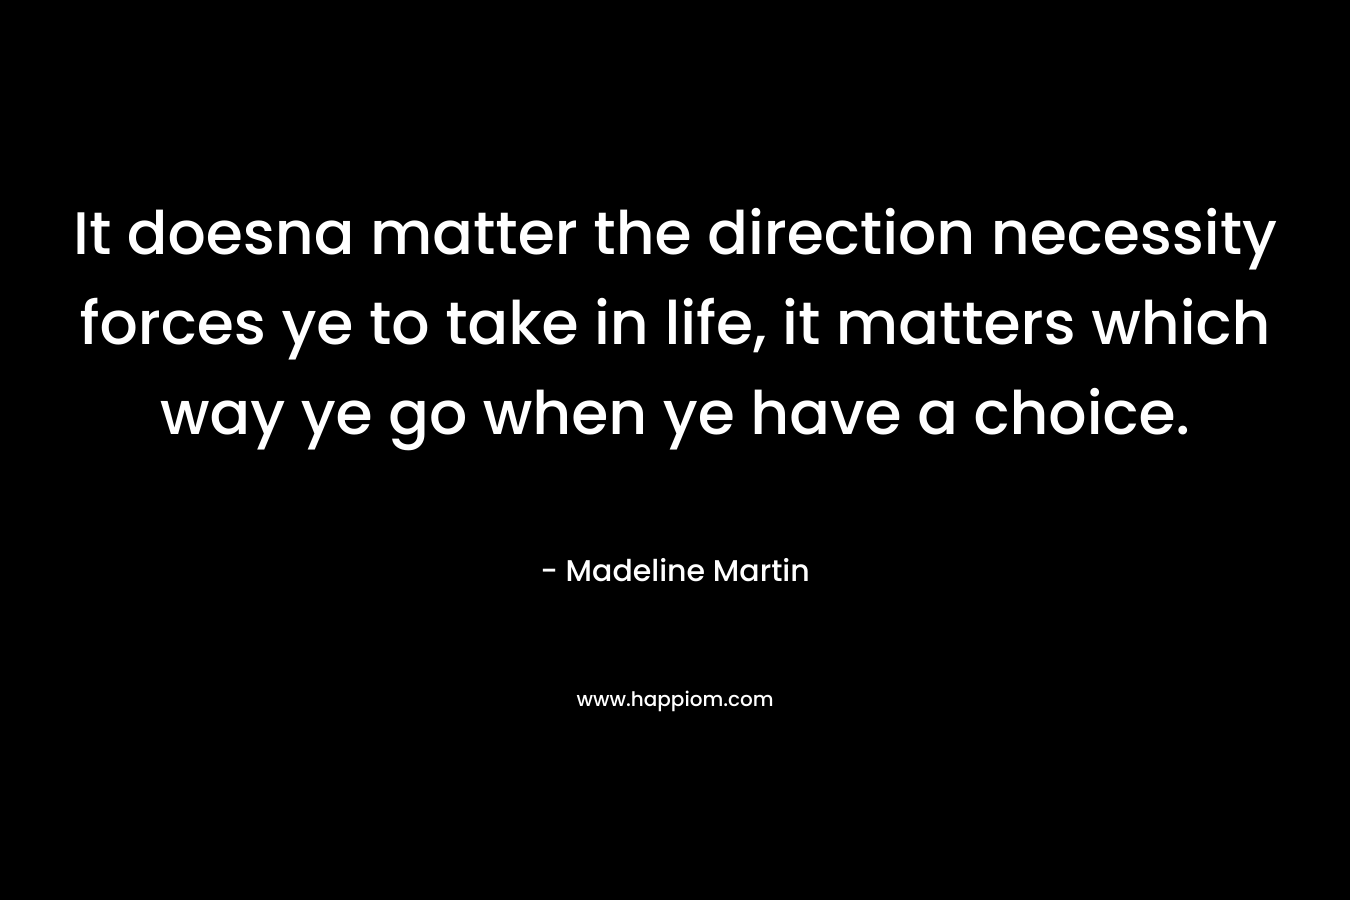 It doesna matter the direction necessity forces ye to take in life, it matters which way ye go when ye have a choice.